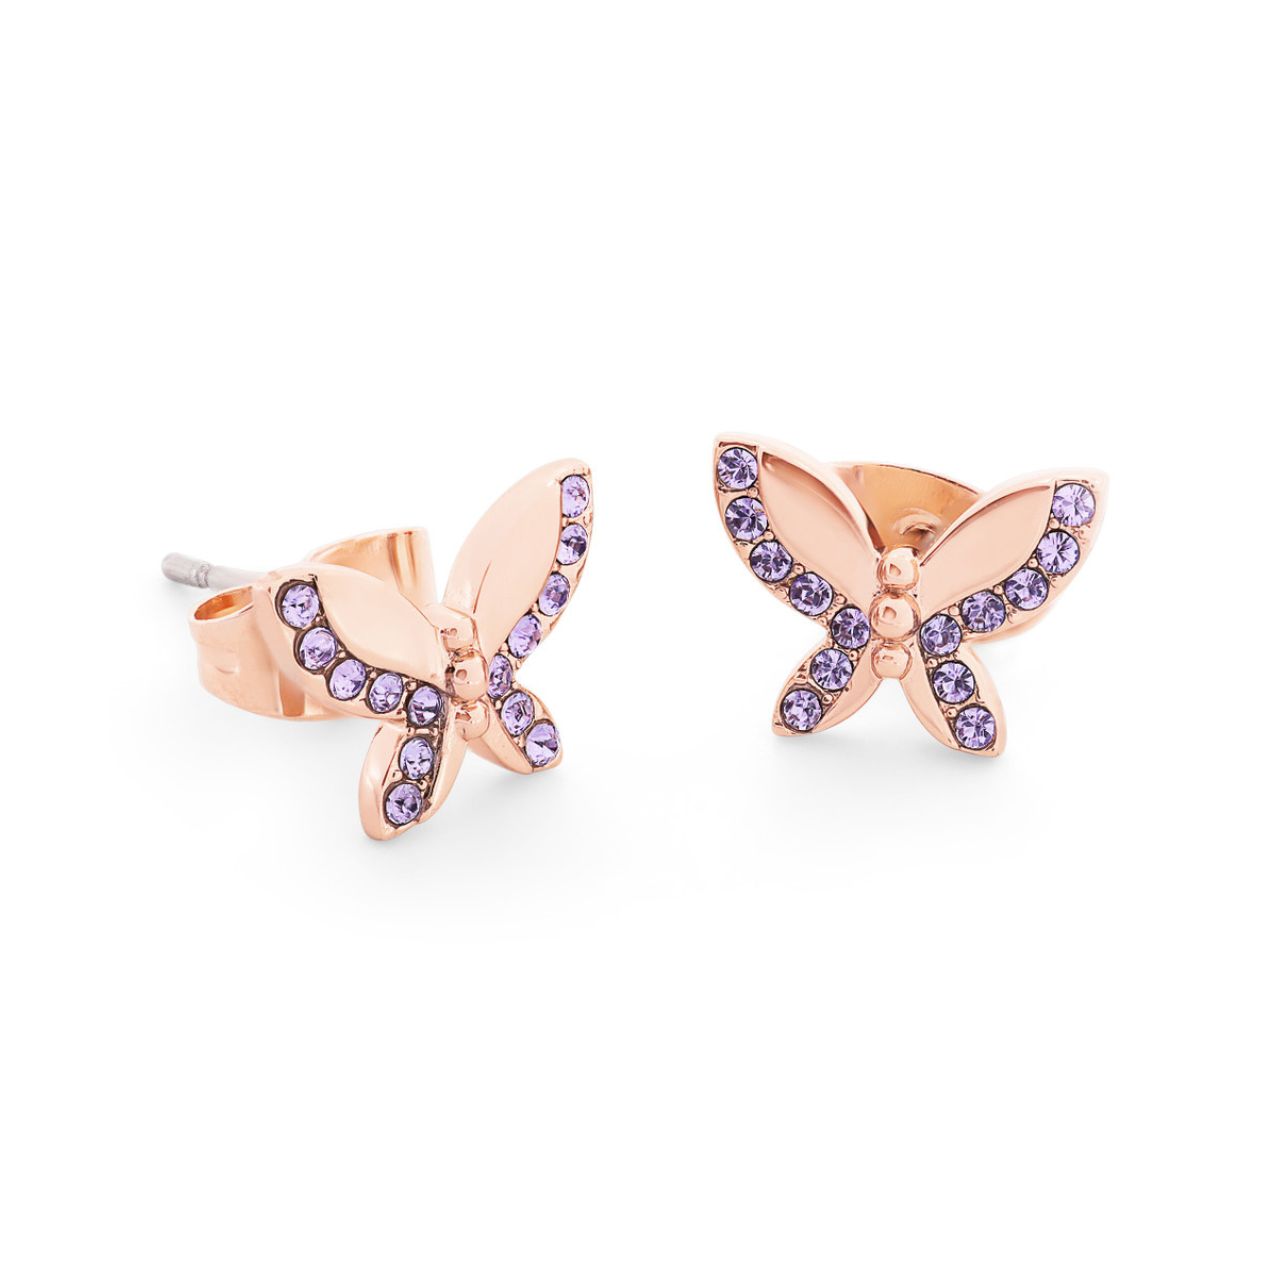 Tipperary Crystal Butterfly Stud Earrings Purple  These pretty butterfly stud earrings can be worn alone or with matching necklace. Sparkling amethyst czs are set delicately on the wings. They secure comfortably with push backs.